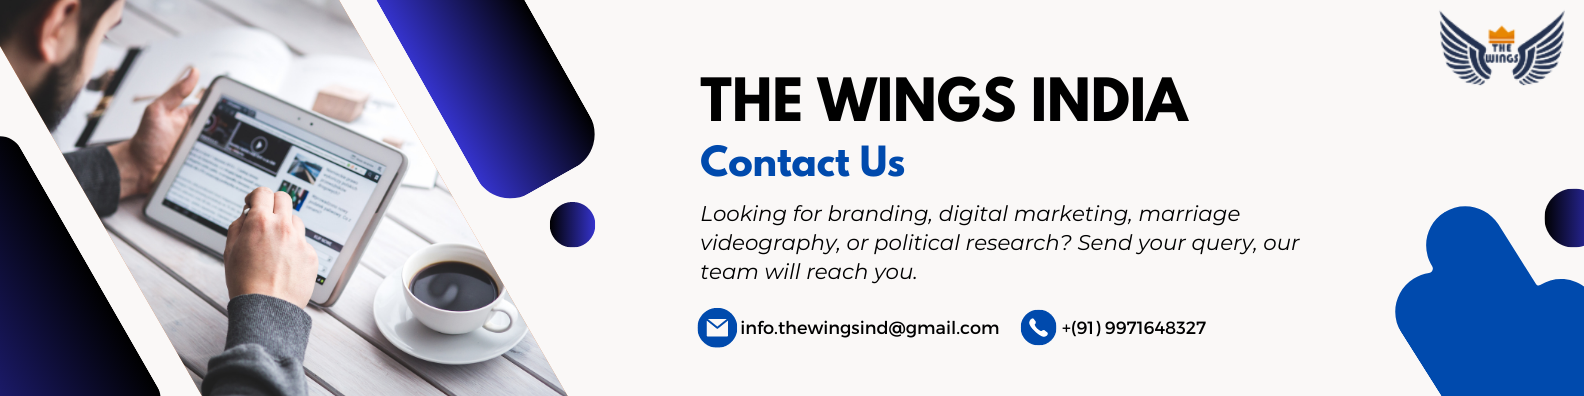 Contact Us - The Wings India